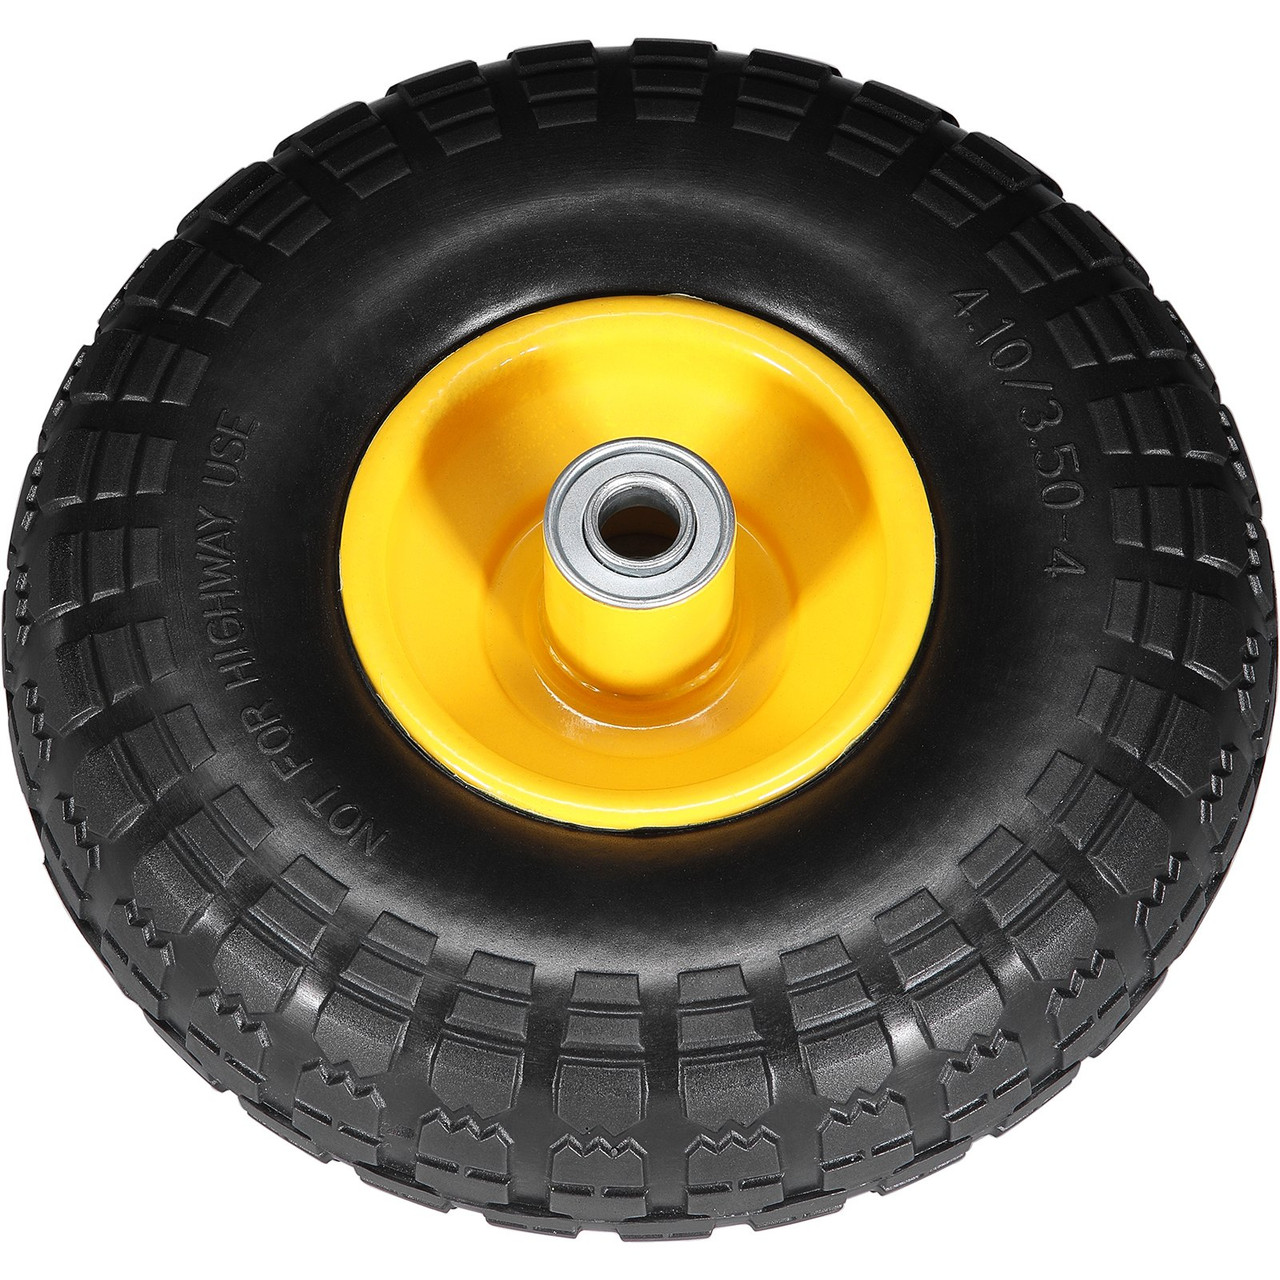 VEVOR Solid PU Run-Flat Tire Wheel, 10", 2-Pack, 400 lbs Dynamic Load, 450 lbs Static Load, Flat Free Tubeless Tires and Wheels for Hand Truck, Utility Cart, Dollies, Garden Trailers, Various Carts